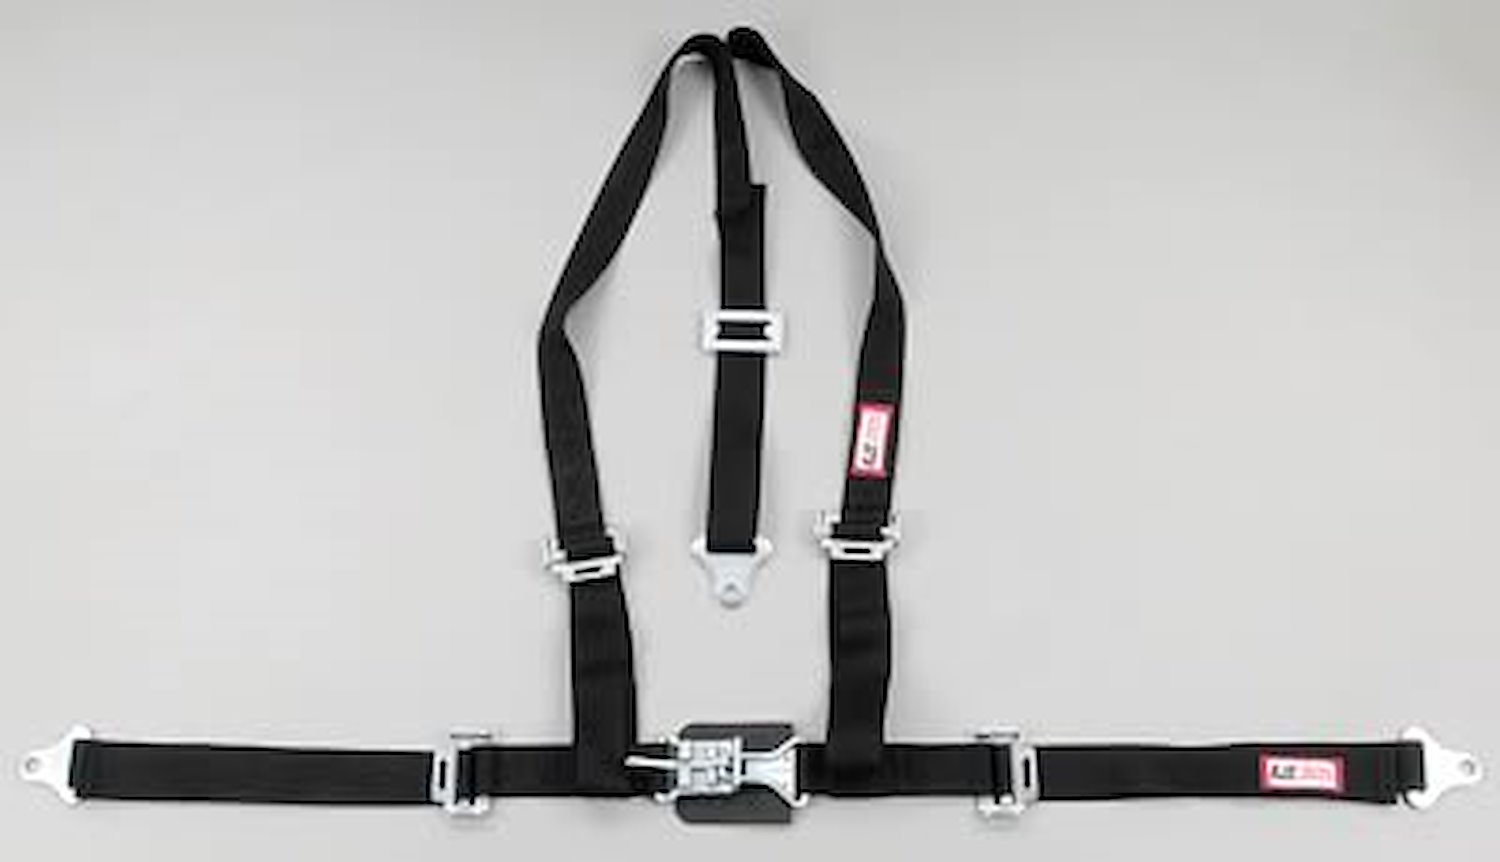 NON-SFI L&L HARNESS 3 PULL UP Lap Belt BOLT SEWN IN 2 S.H. Y FLOOR Mount WRAP/BOLT RED